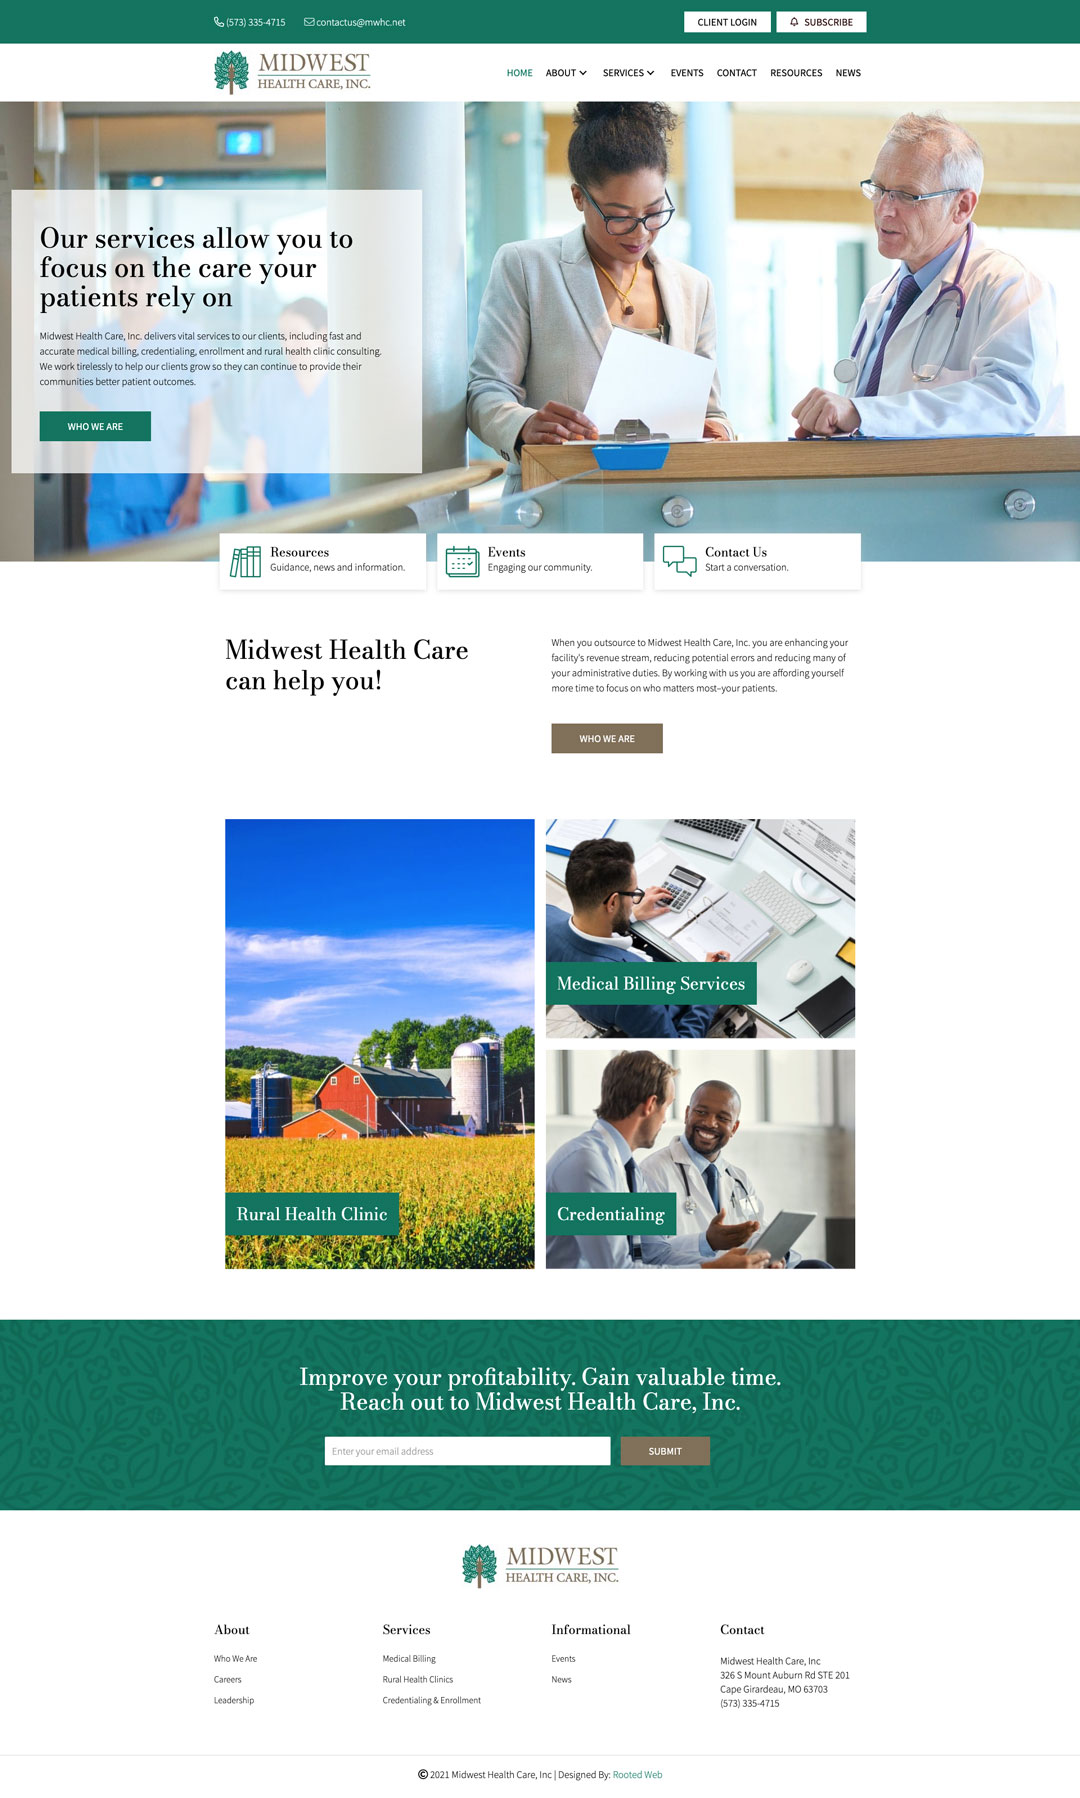 Midwest Healthcare Inc